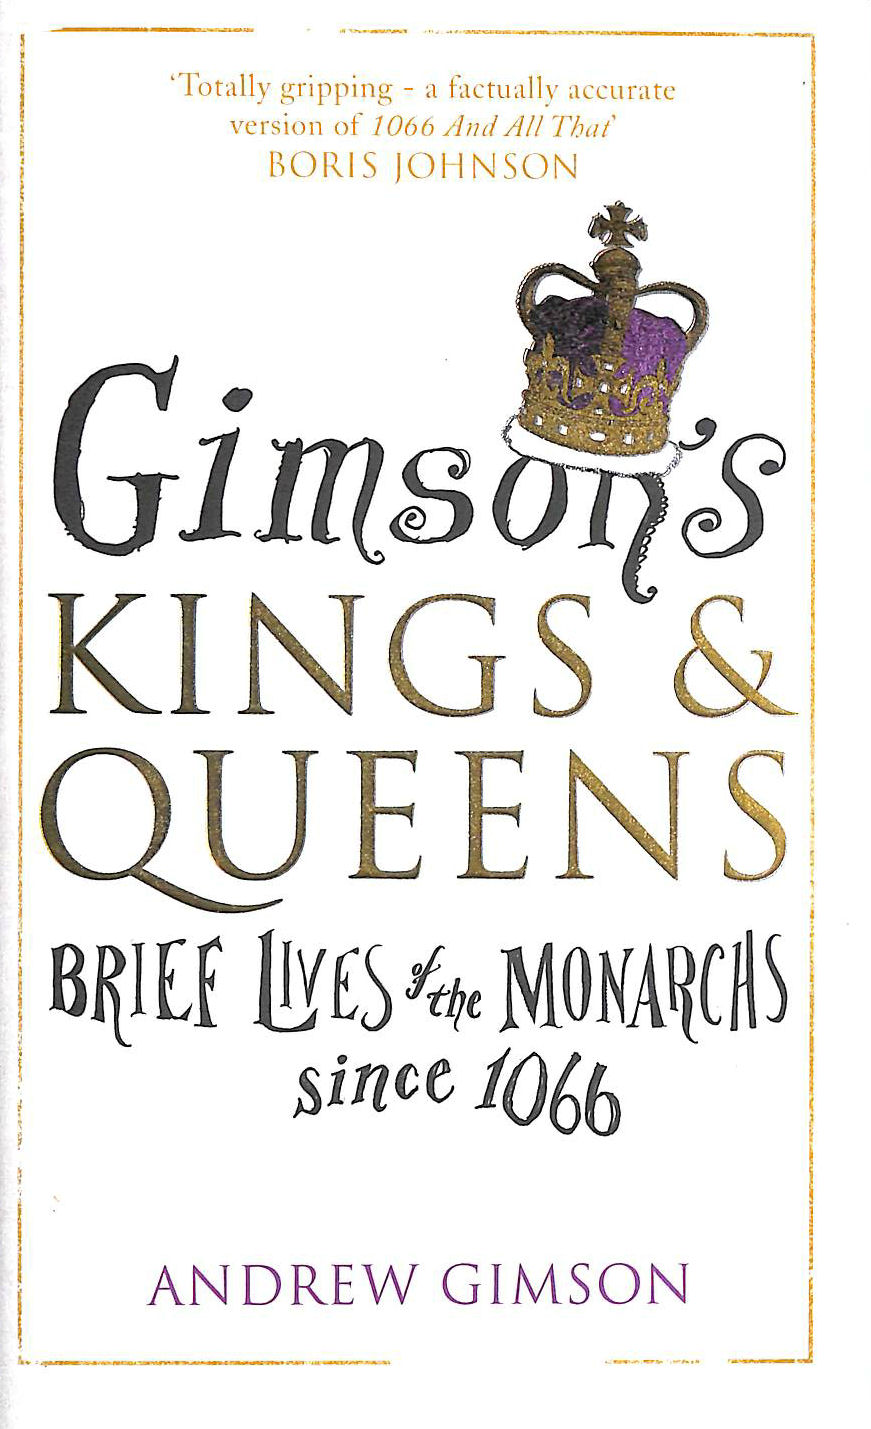  - Gimson's Kings and Queens: Brief Lives of the Forty Monarchs since 1066